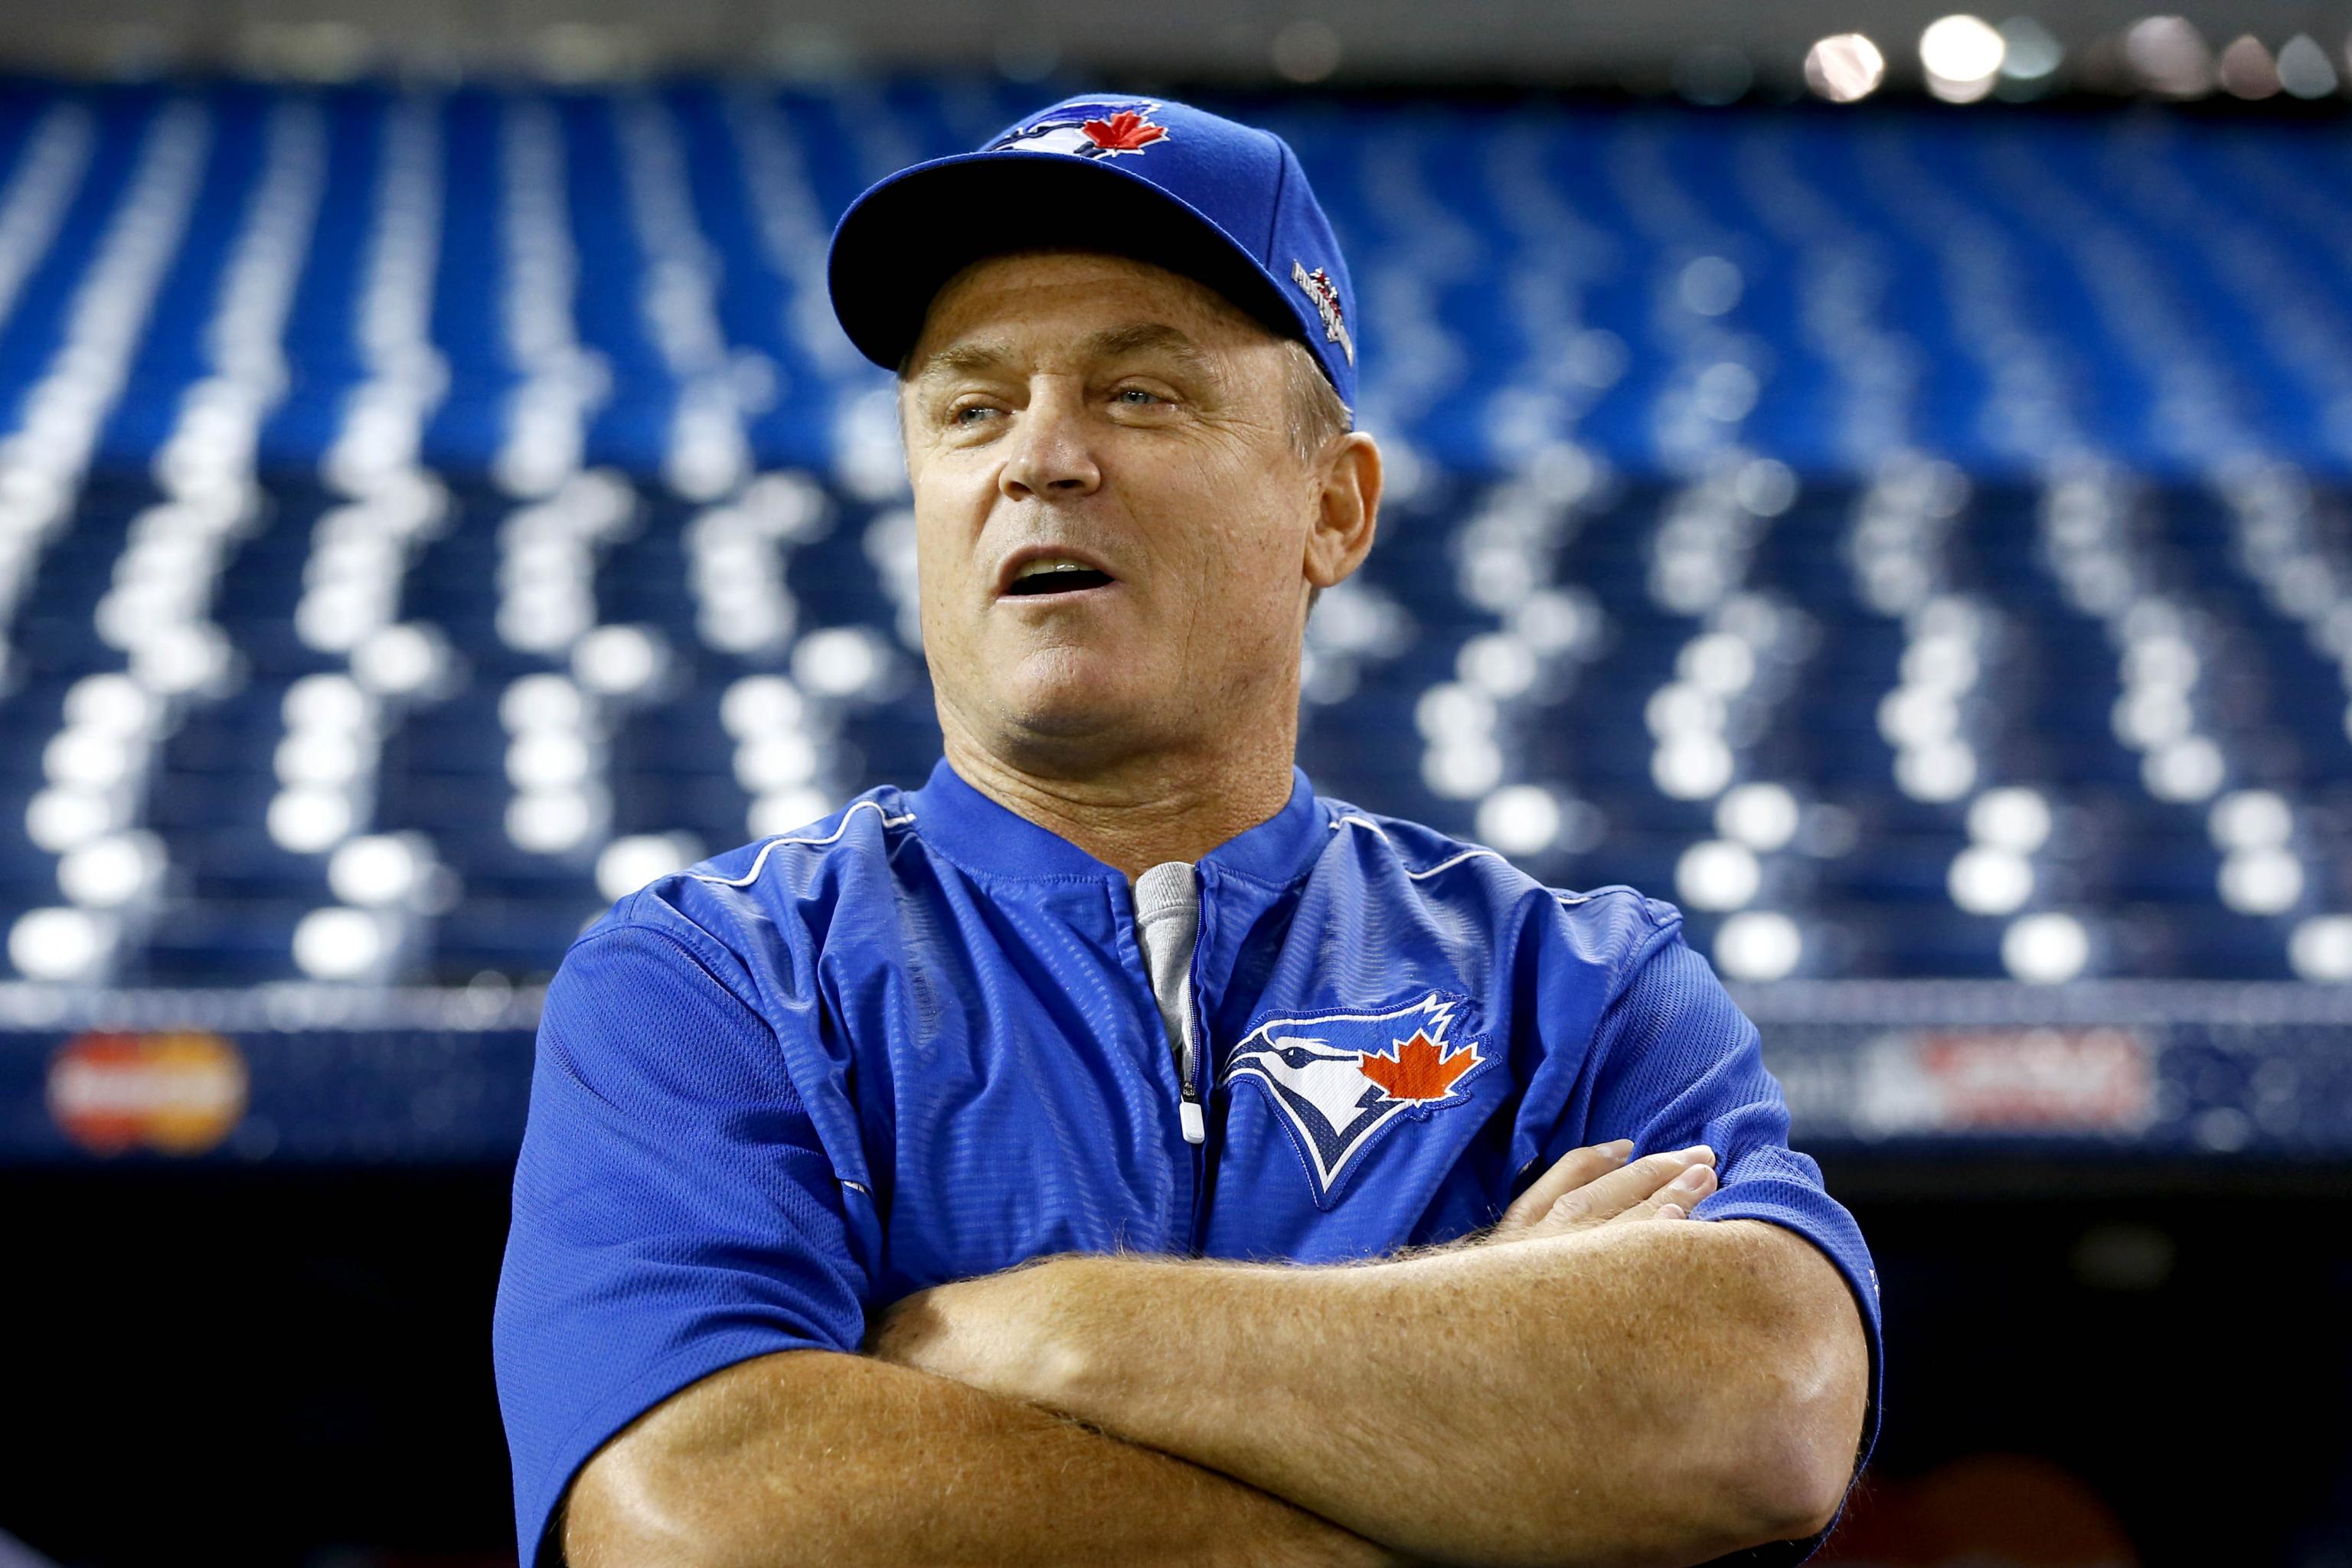 Restocked Blue Jays Again Hire John Gibbons as Manager - The New York Times